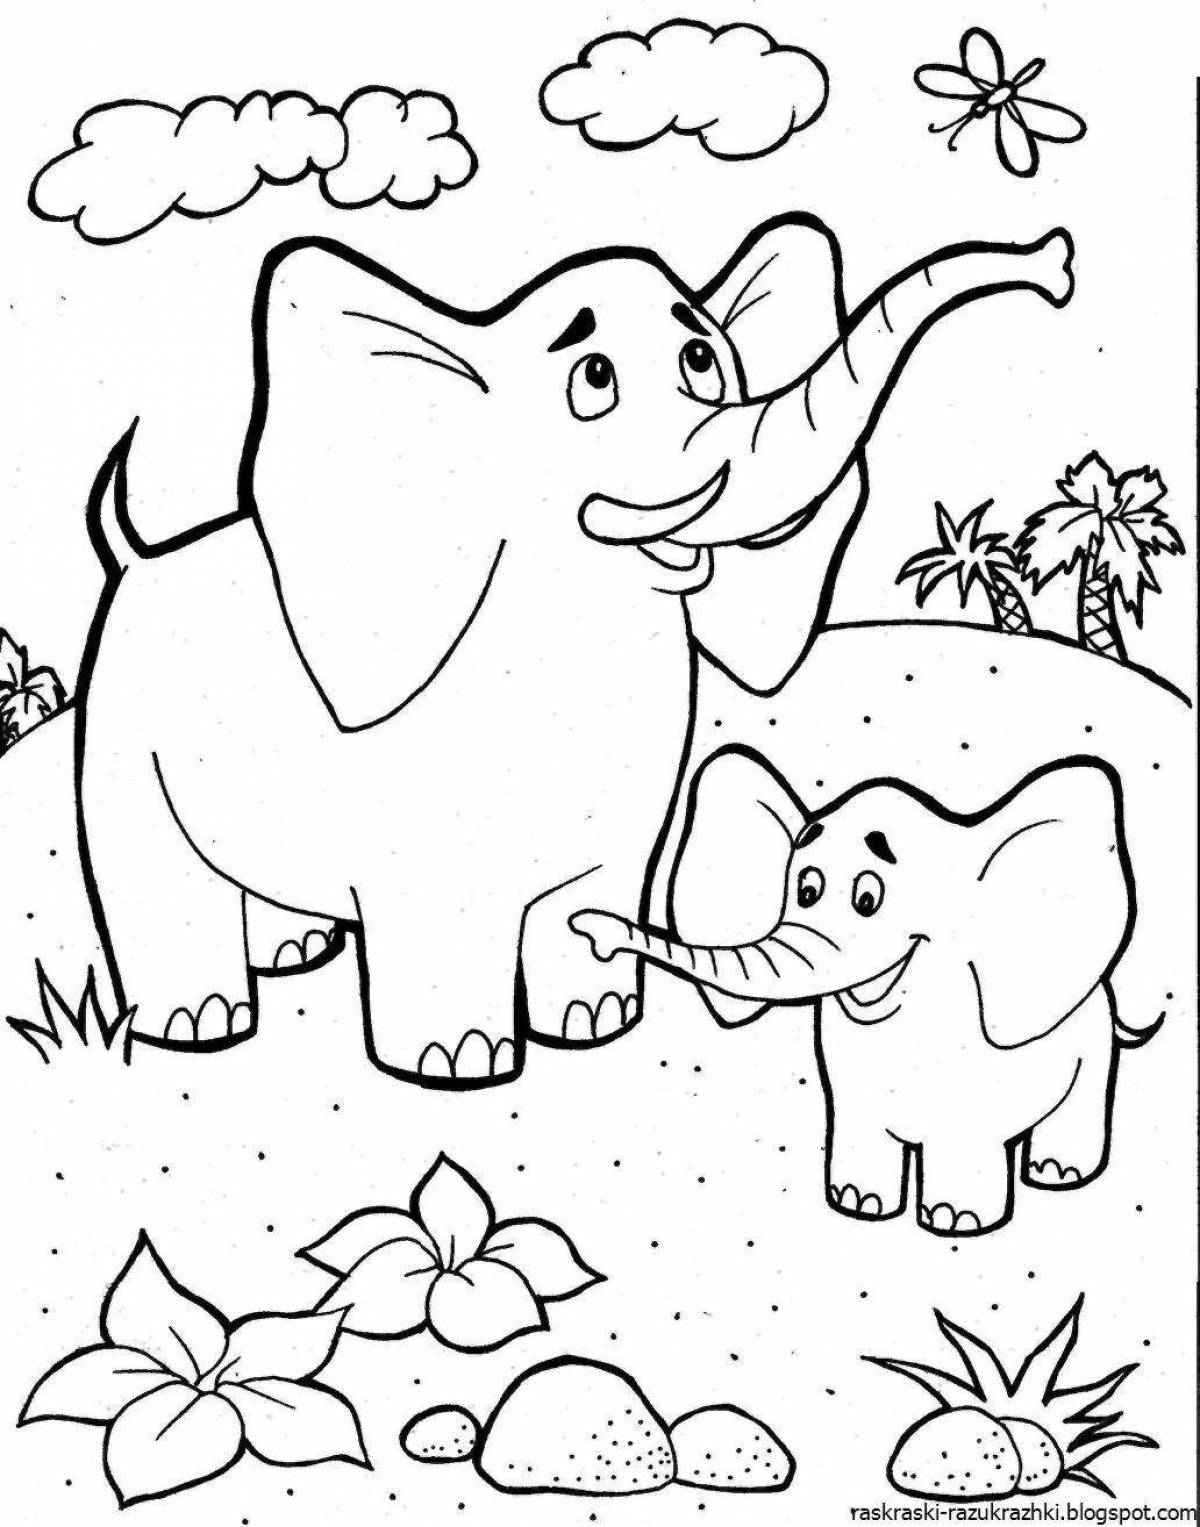 Exciting coloring book for 4-5 year olds